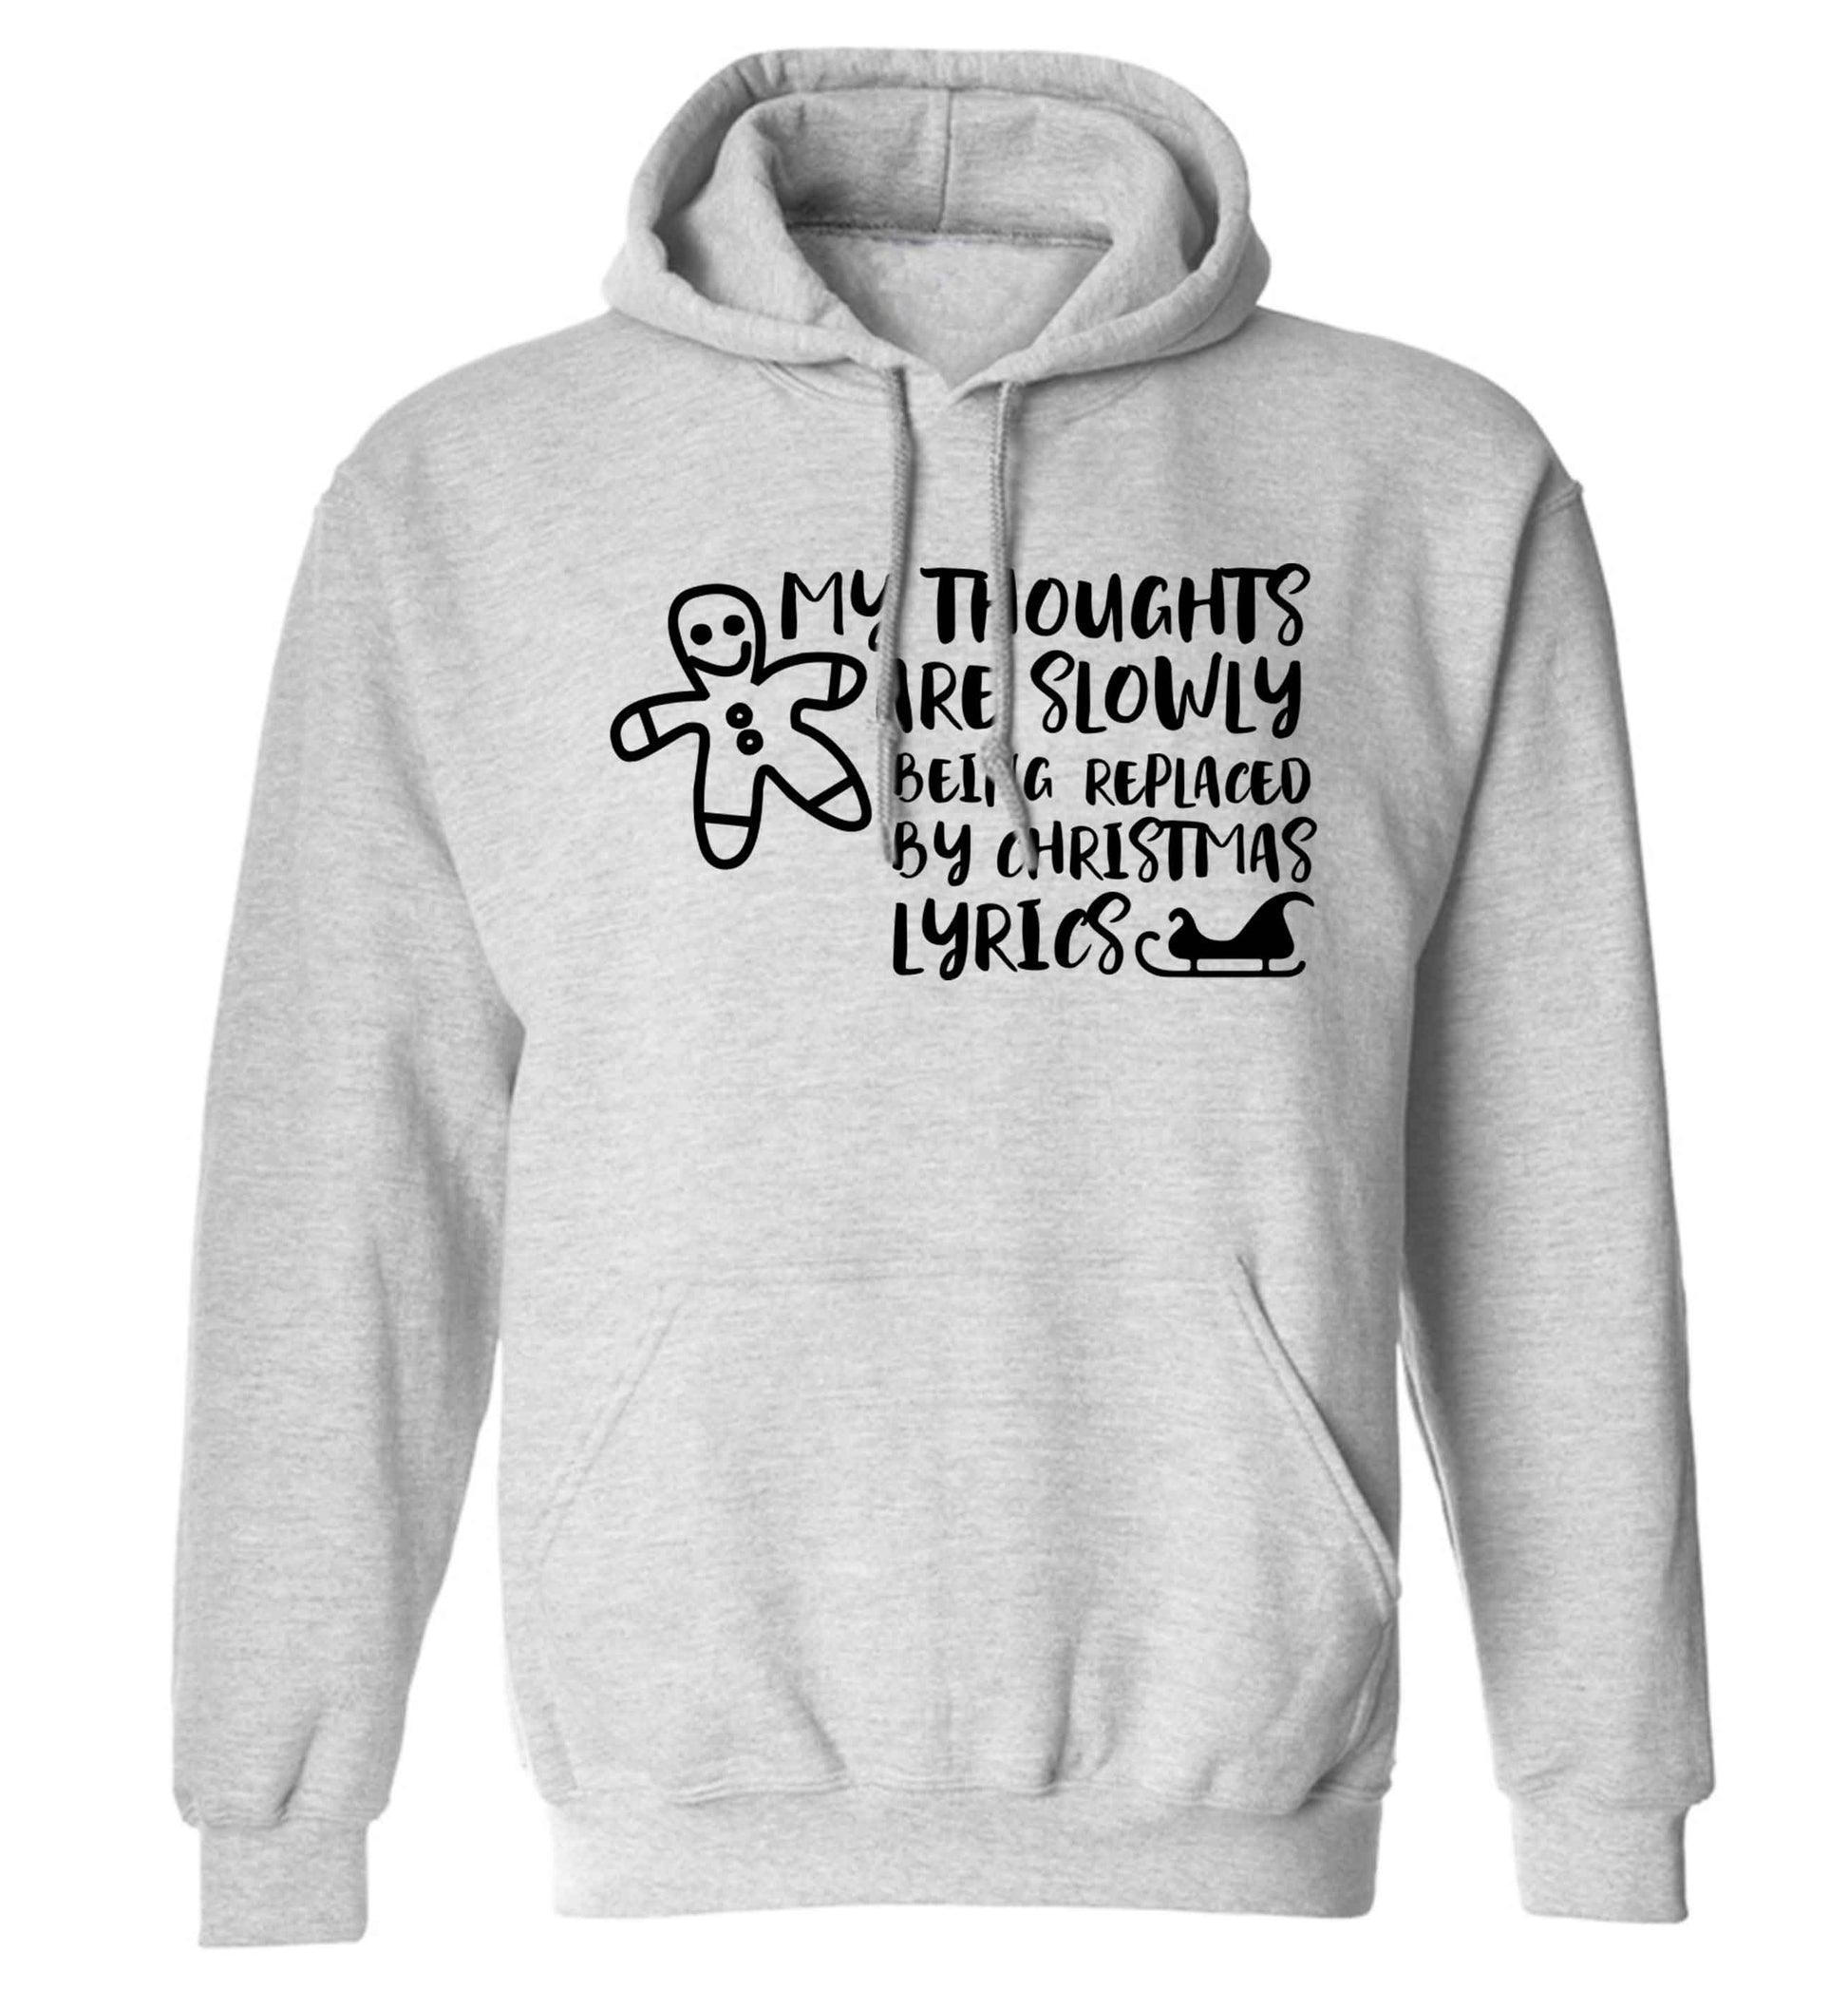 My thoughts are slowly being replaced by Christmas lyrics adults unisex grey hoodie 2XL